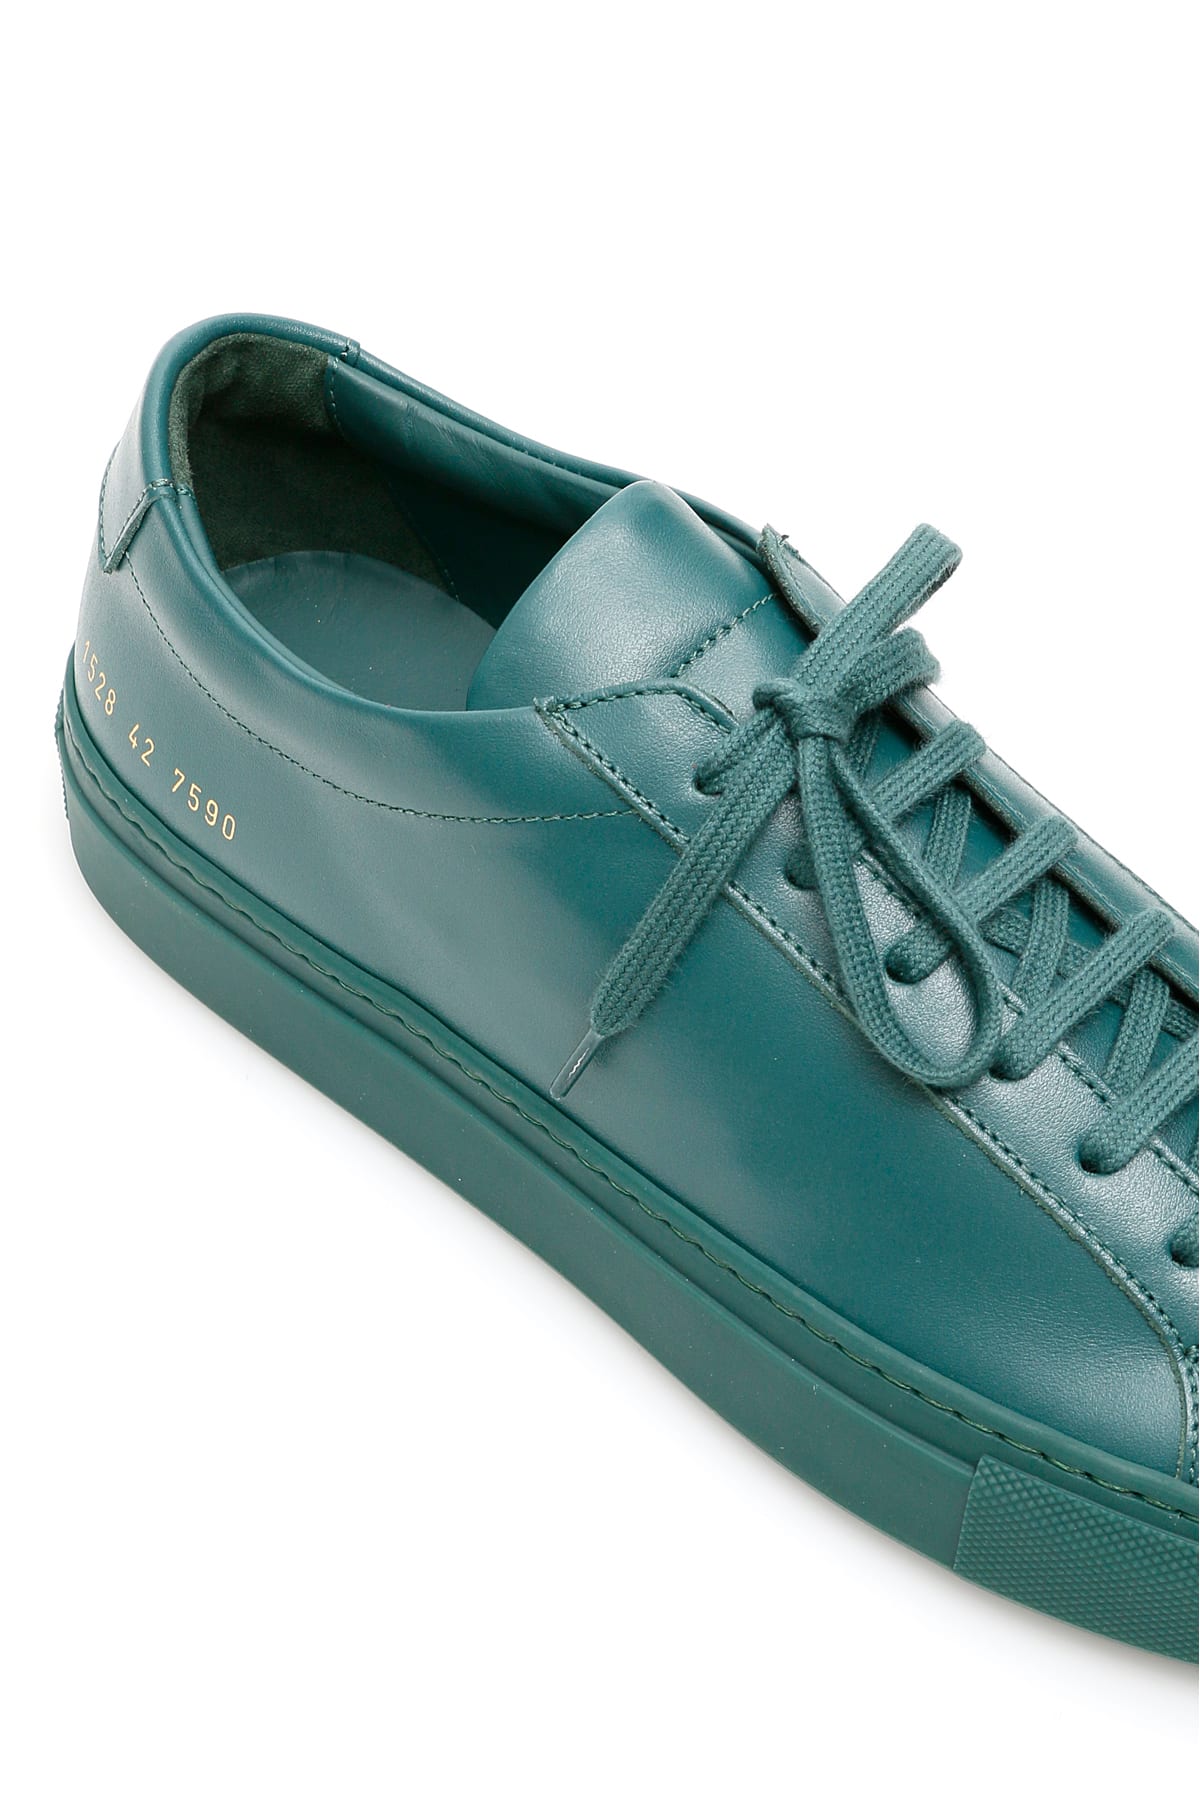 common projects achilles low green